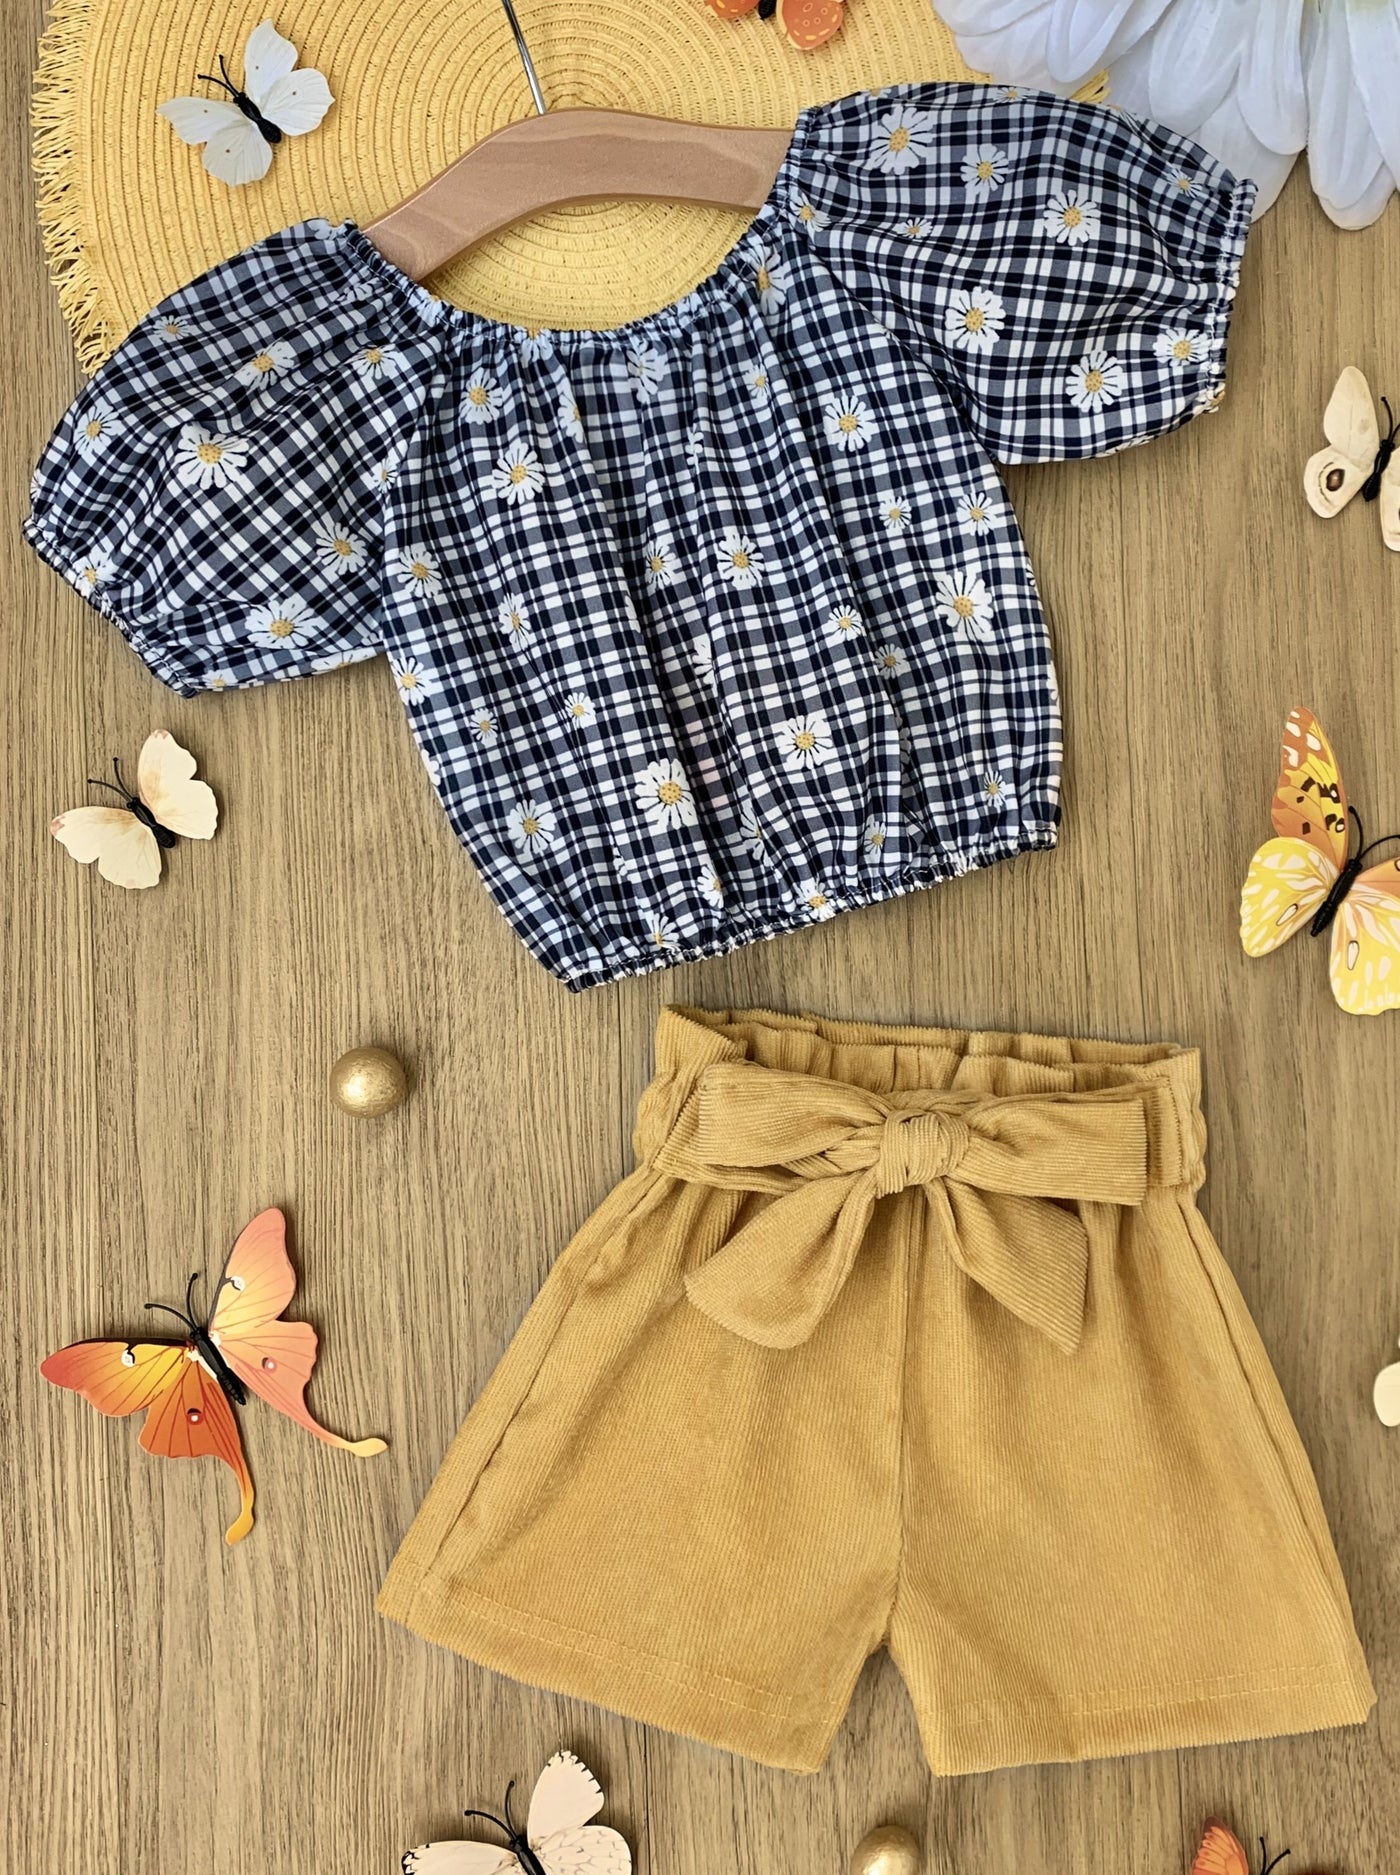 Spring Outfits | Girls Plaid Daisy Smocked Top & Paperbag Shorts Set ...